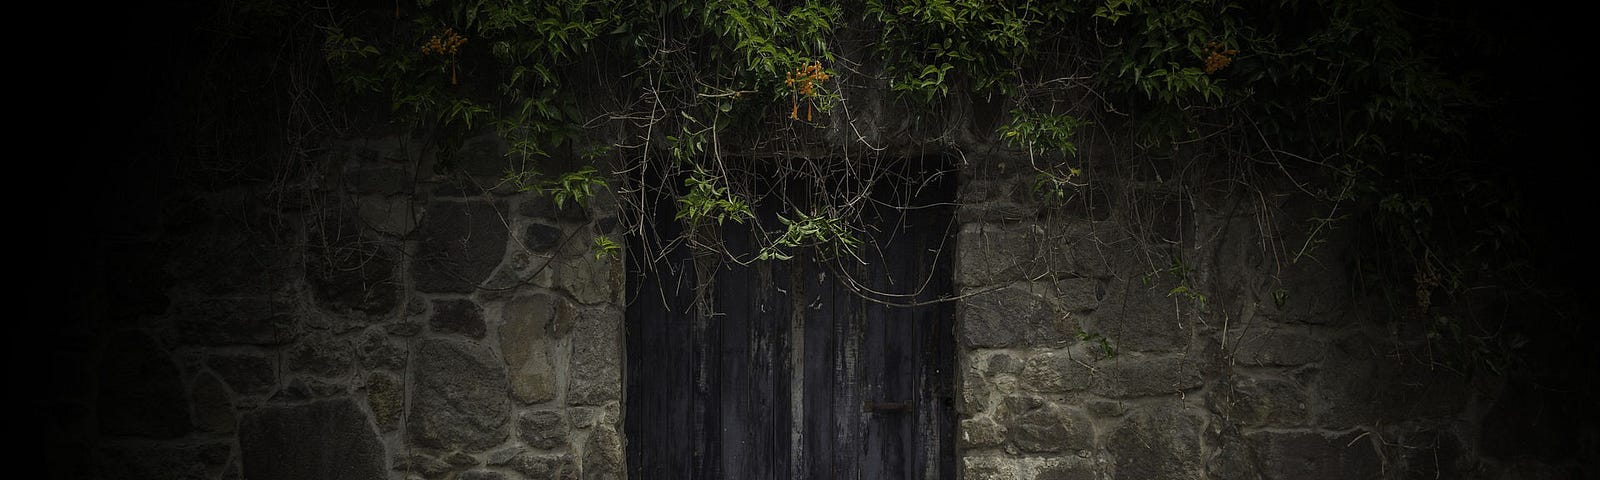 Photo of a wooden door in a stone wall.